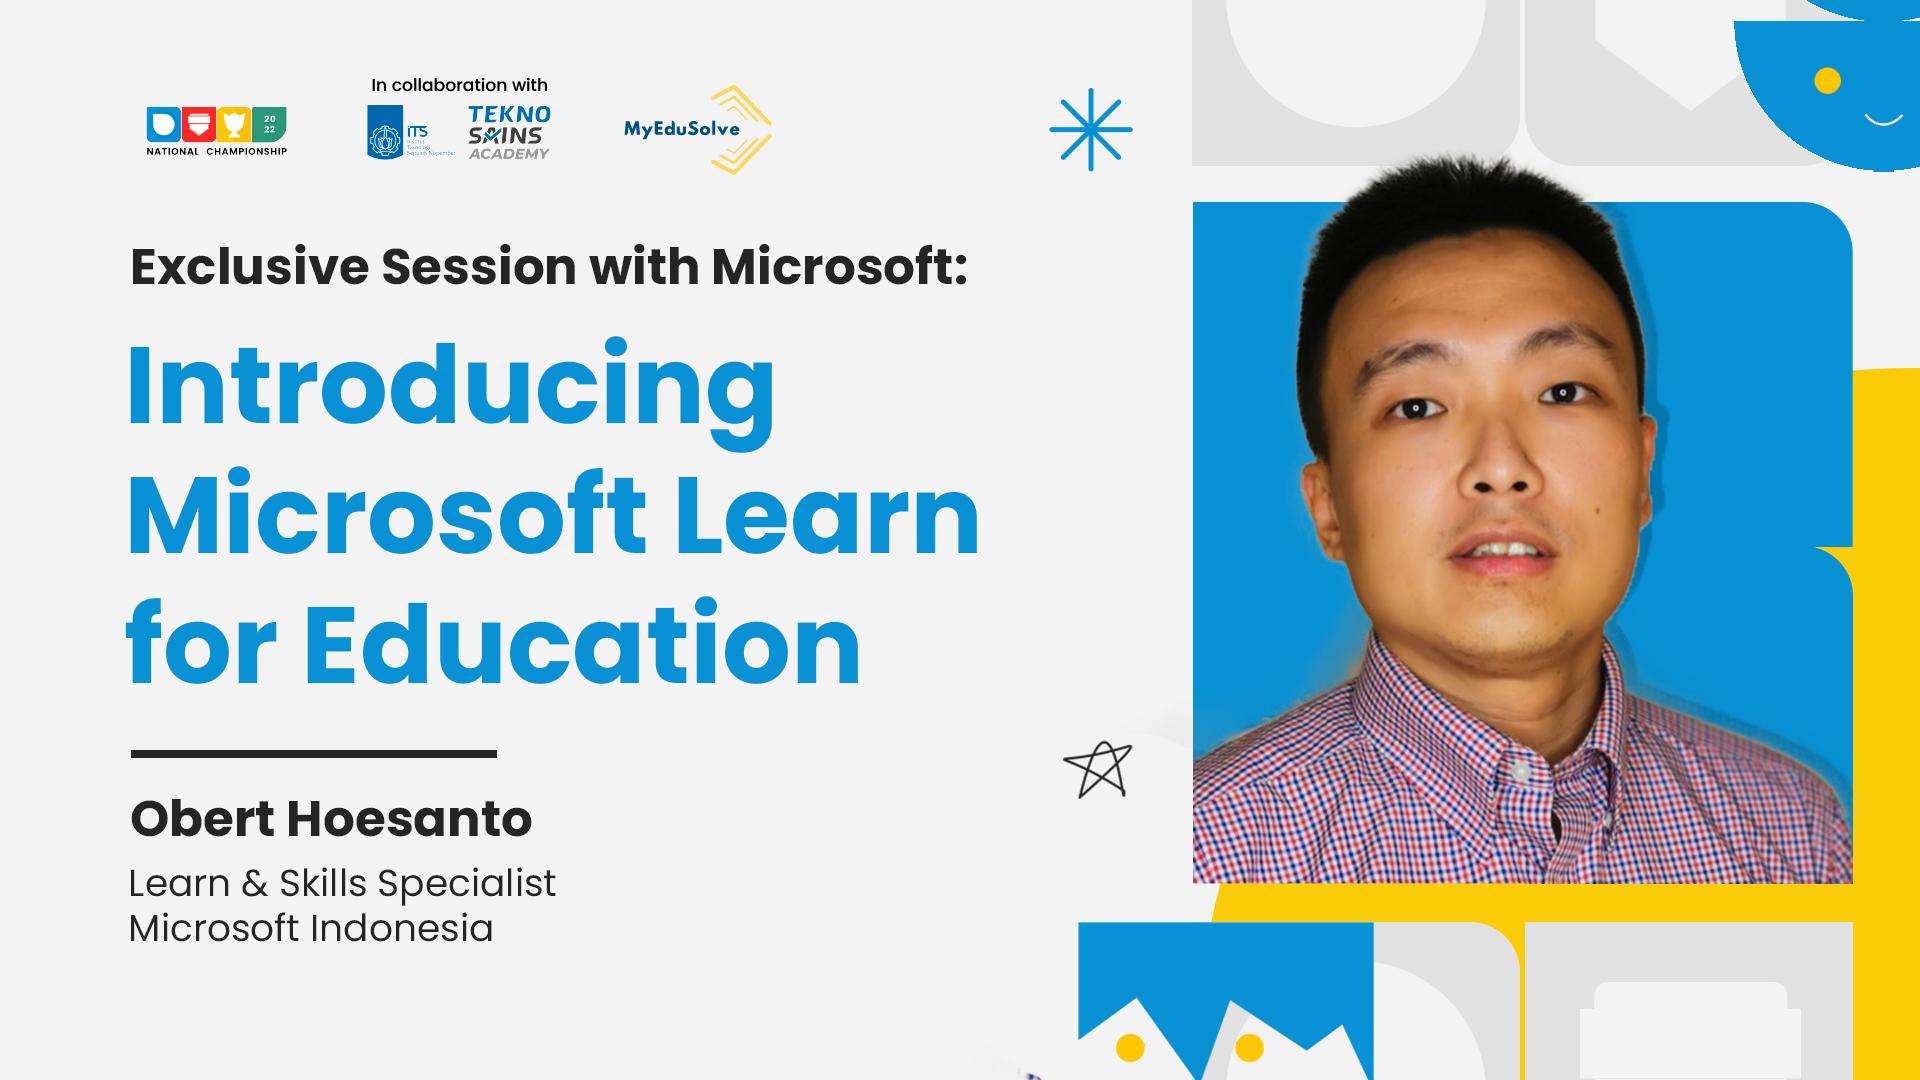 Introducing Microsoft Learn for Education